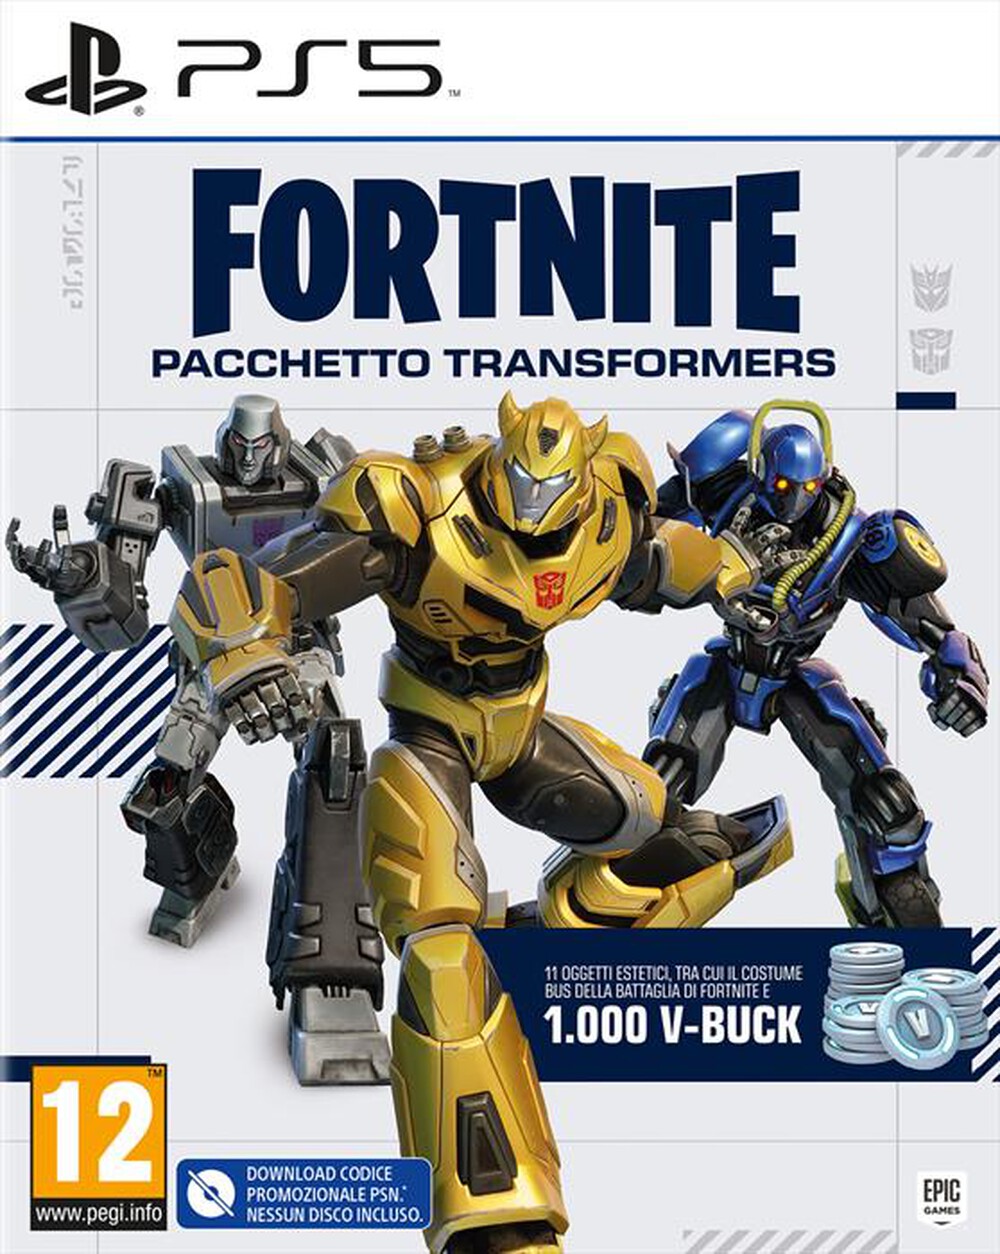 "EPIC GAMES - Fortnite Transformers Pack PS5"